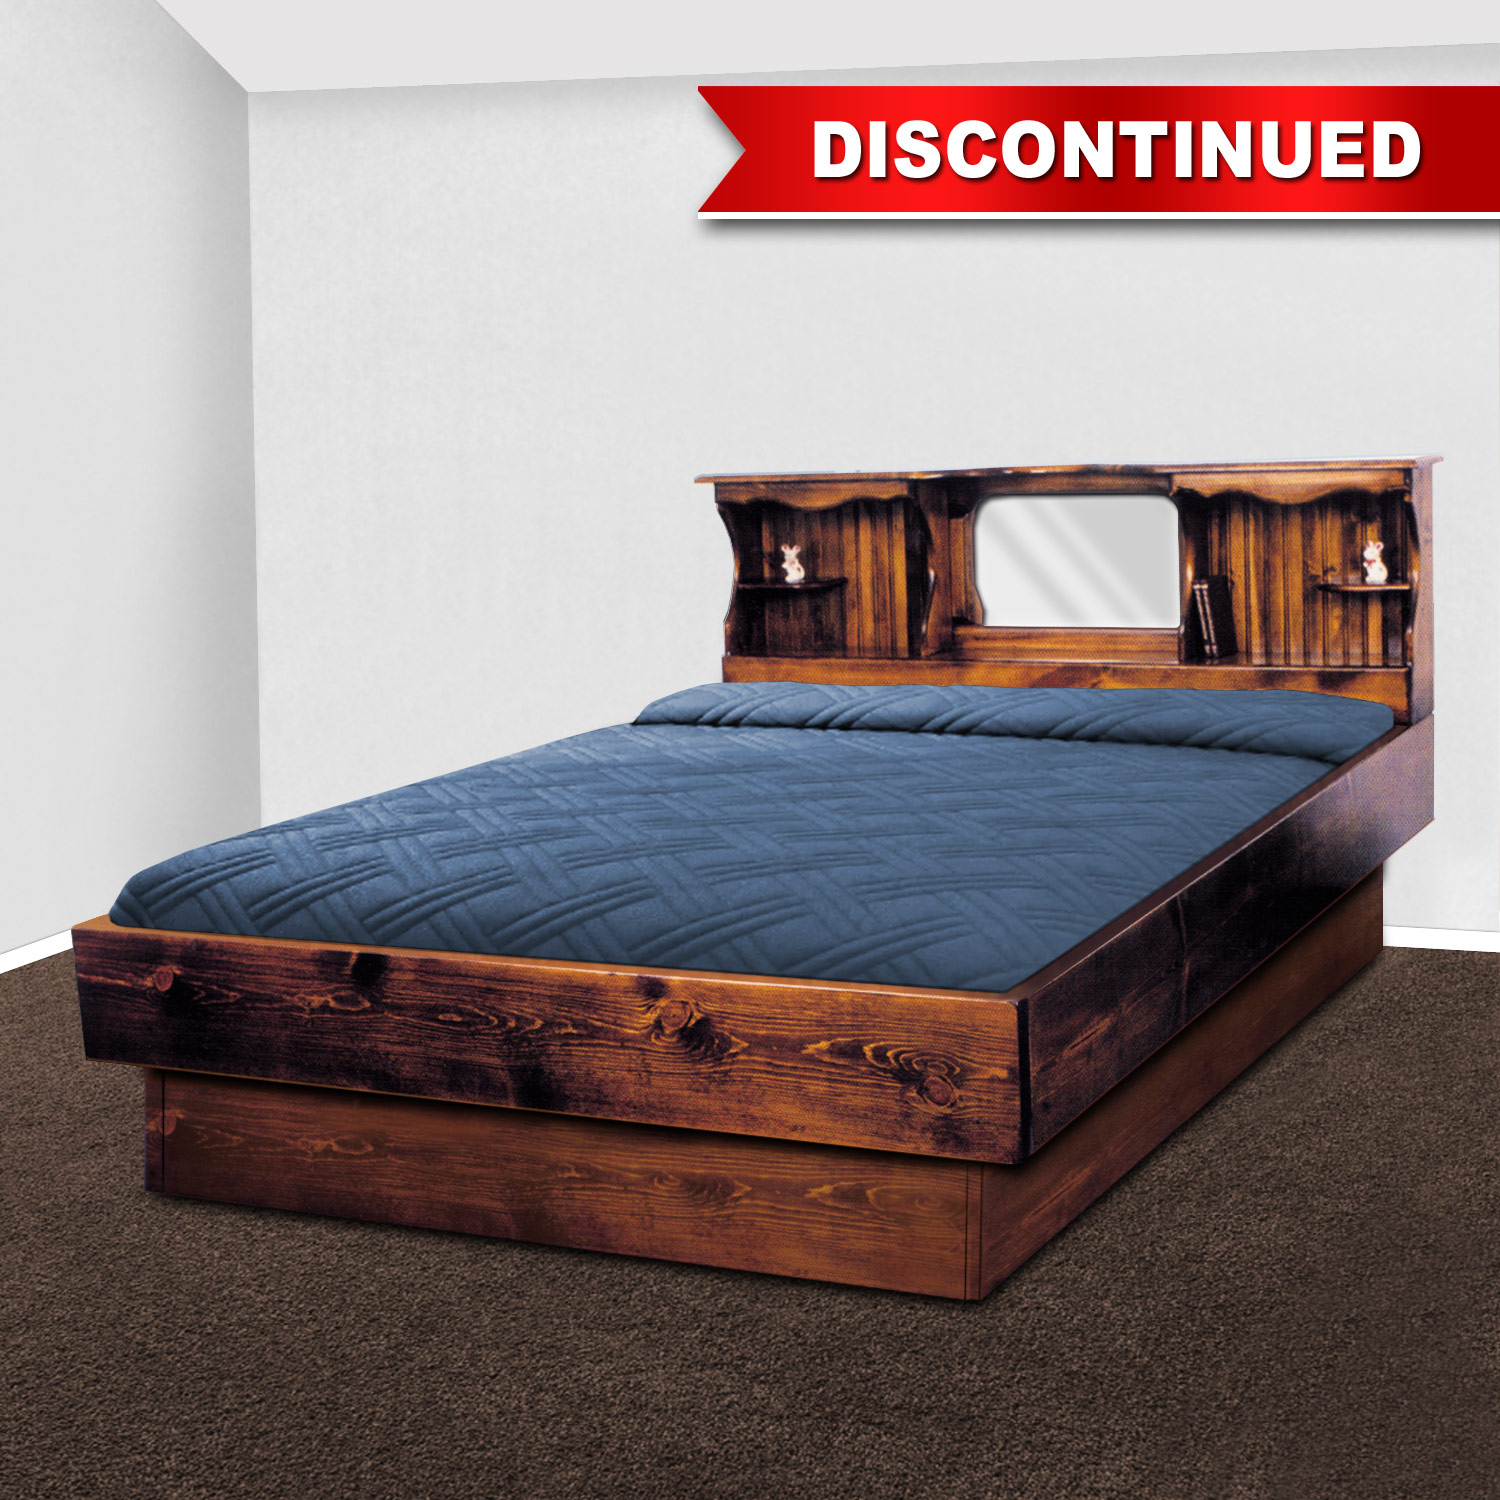 Waterbed Headboard Frame Set, Can You Put A Waterbed Mattress On Regular Frame